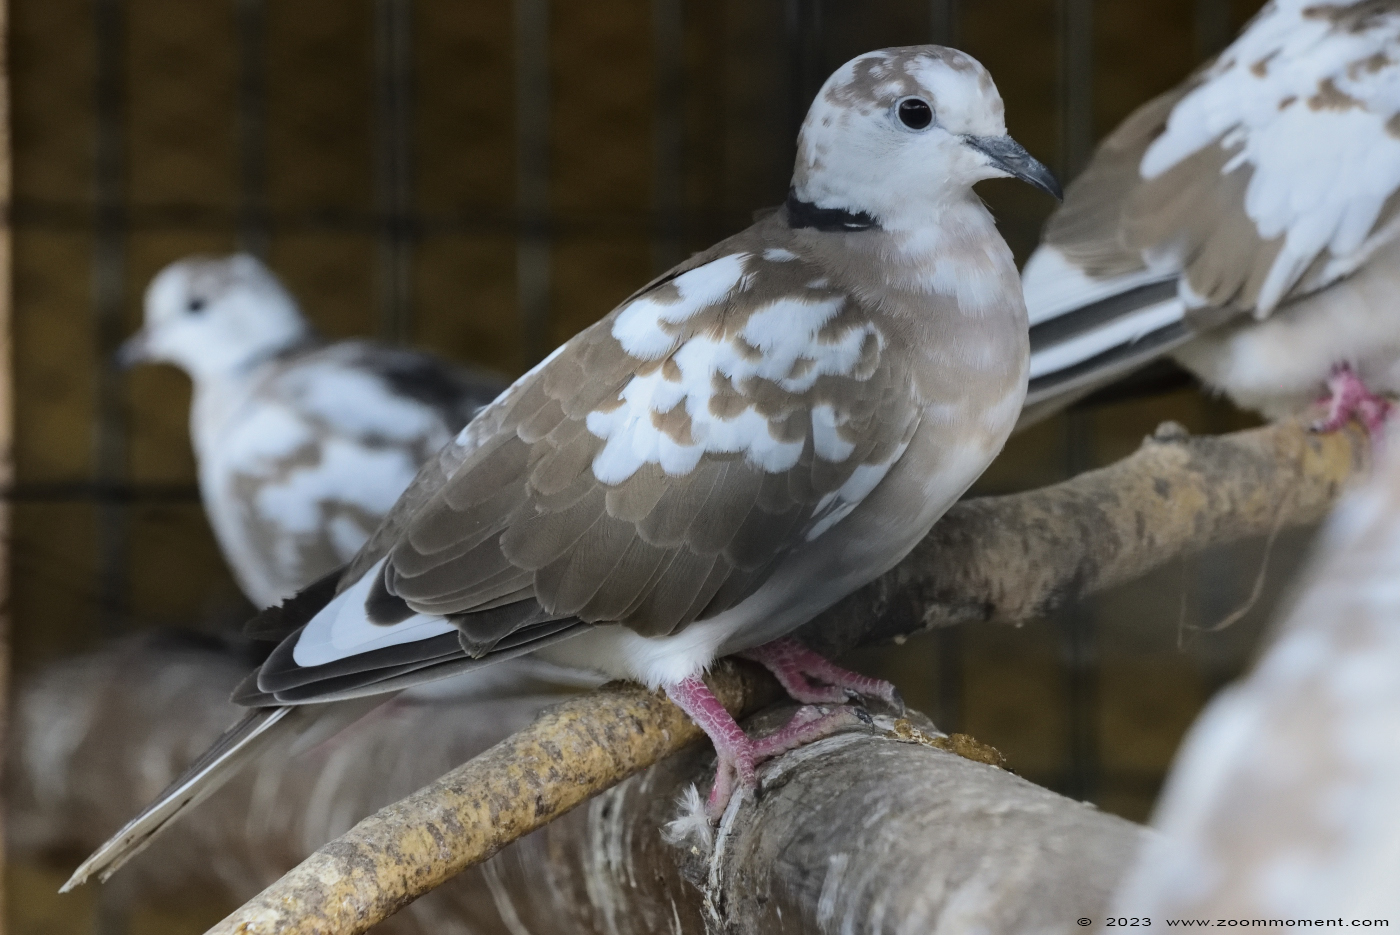 duif dove
Palavras chave: Tierpark Donnersberg Germany duif dove